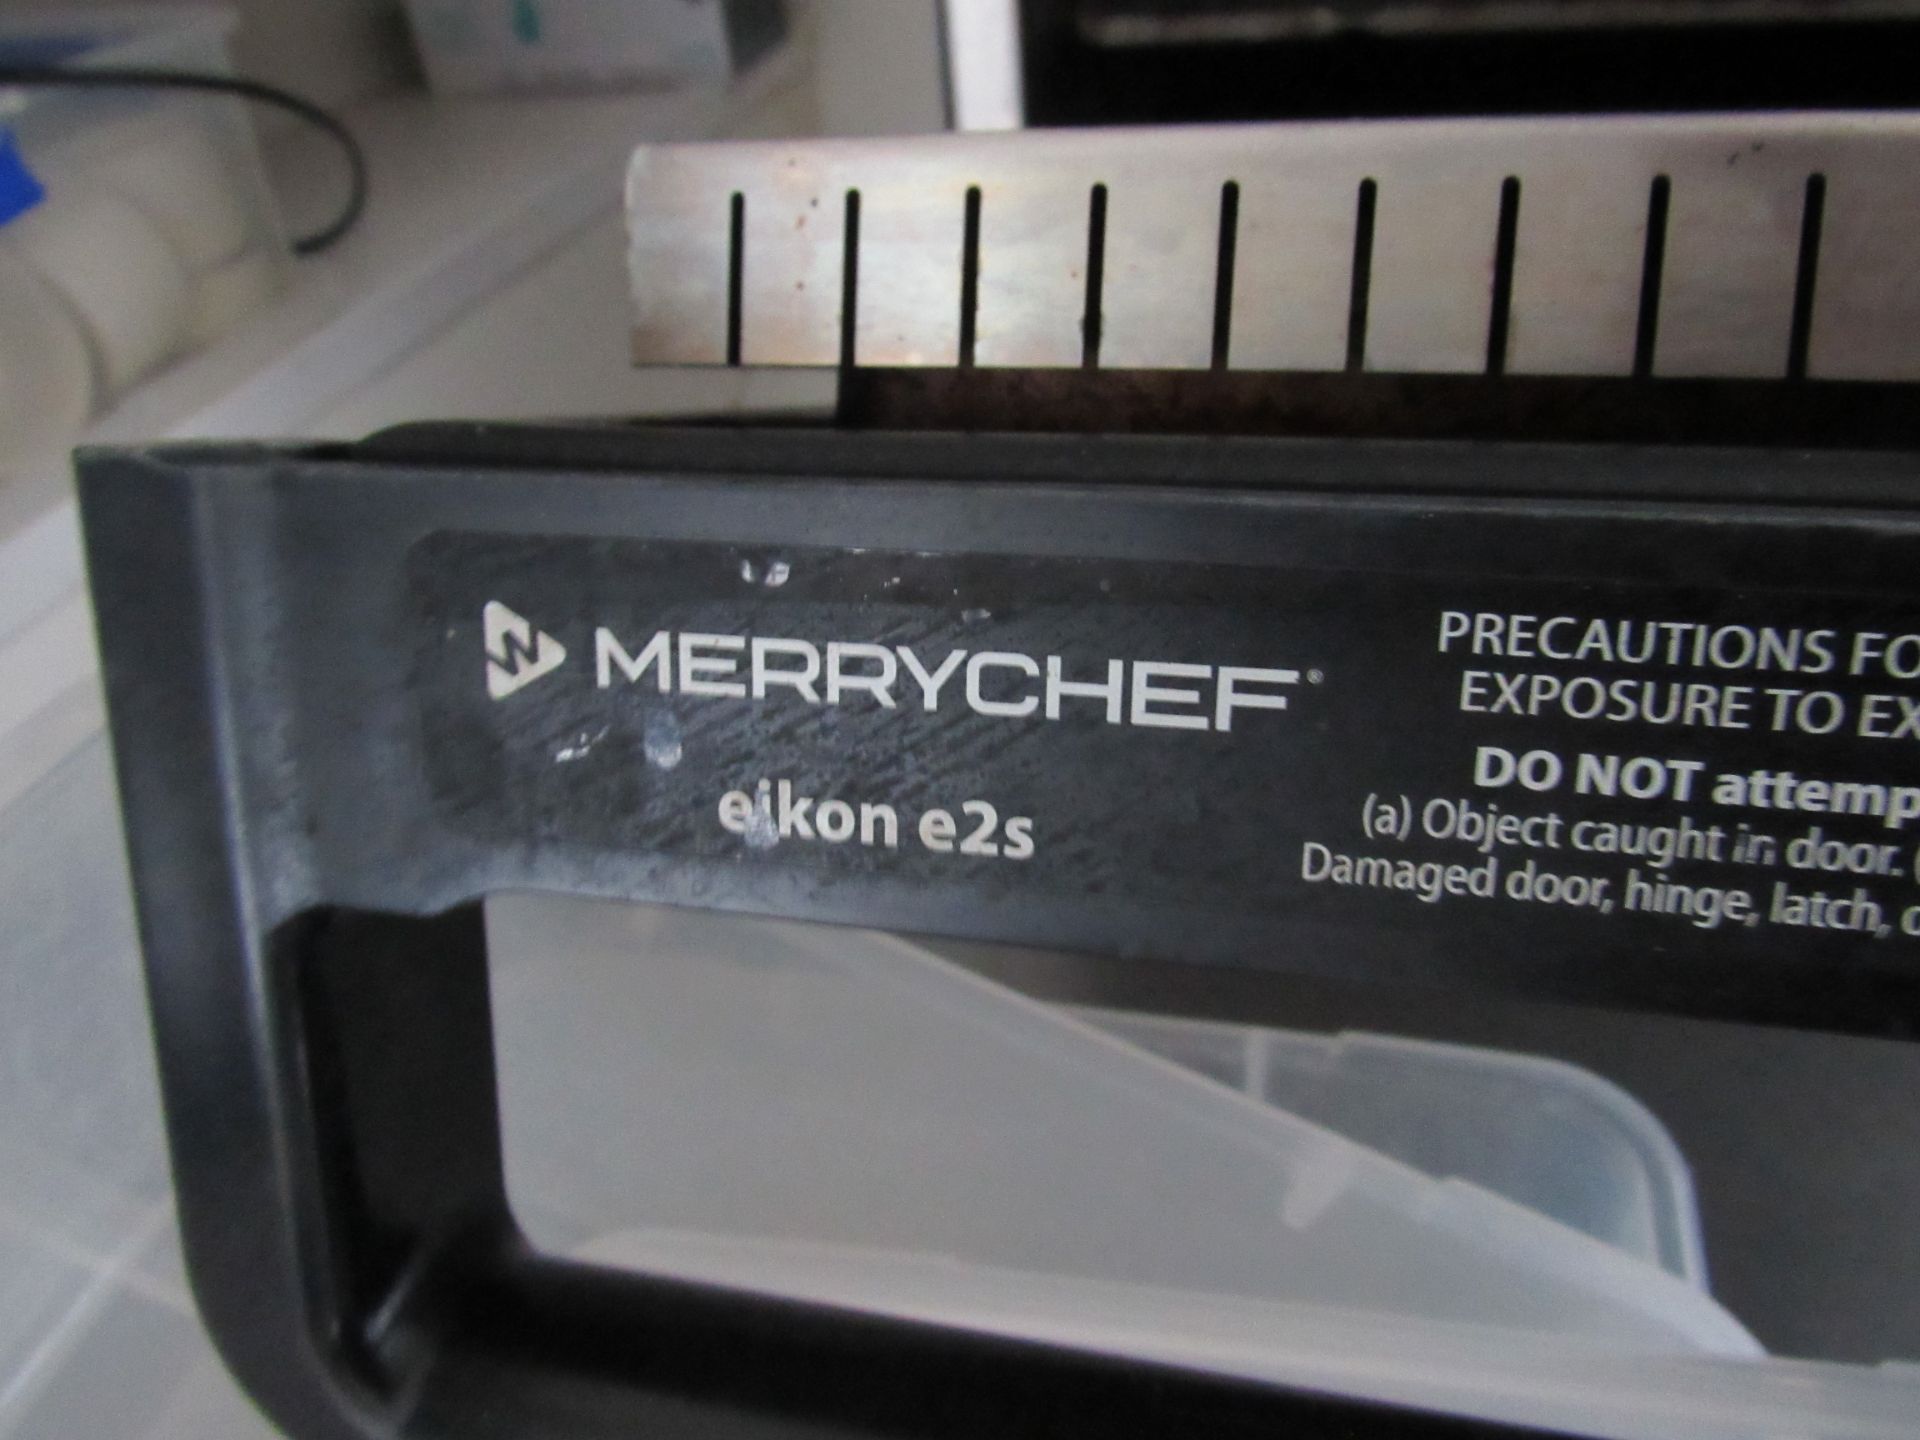 Merrychef Eikon E2S SP 1kW High Speed Oven Single Phase, 2.2kW Convection/1kW Microwave | - Image 4 of 4